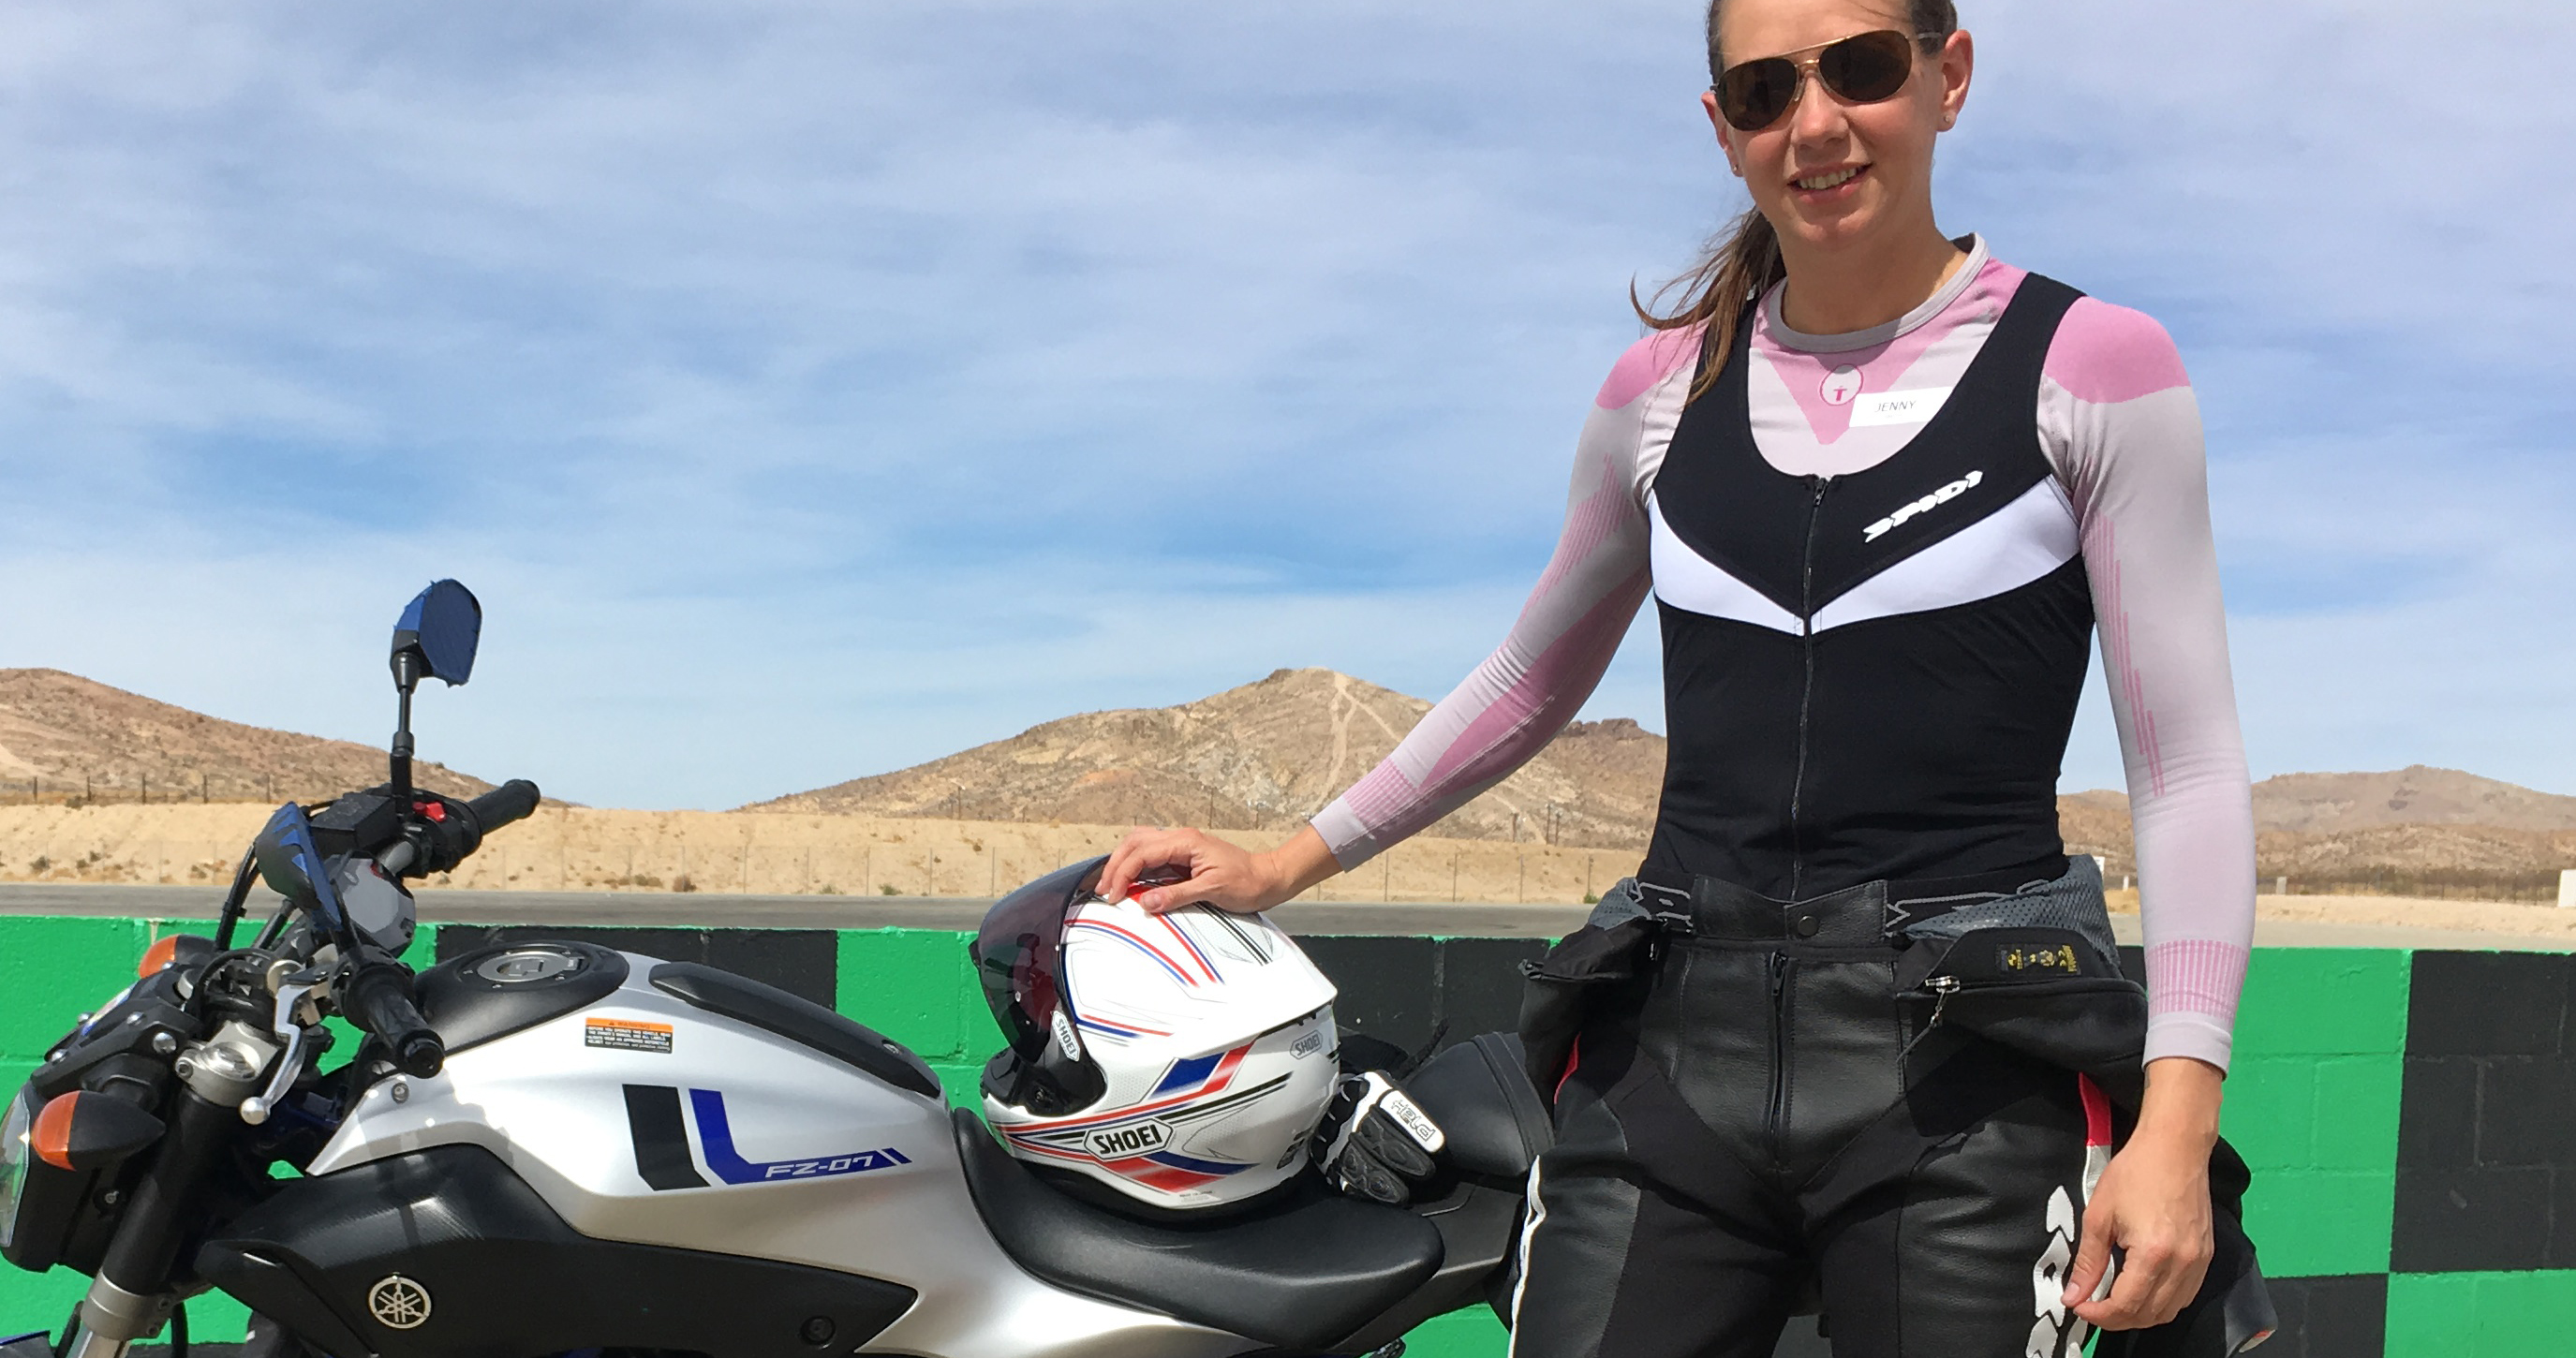 Outfitting yourself for your first trackday